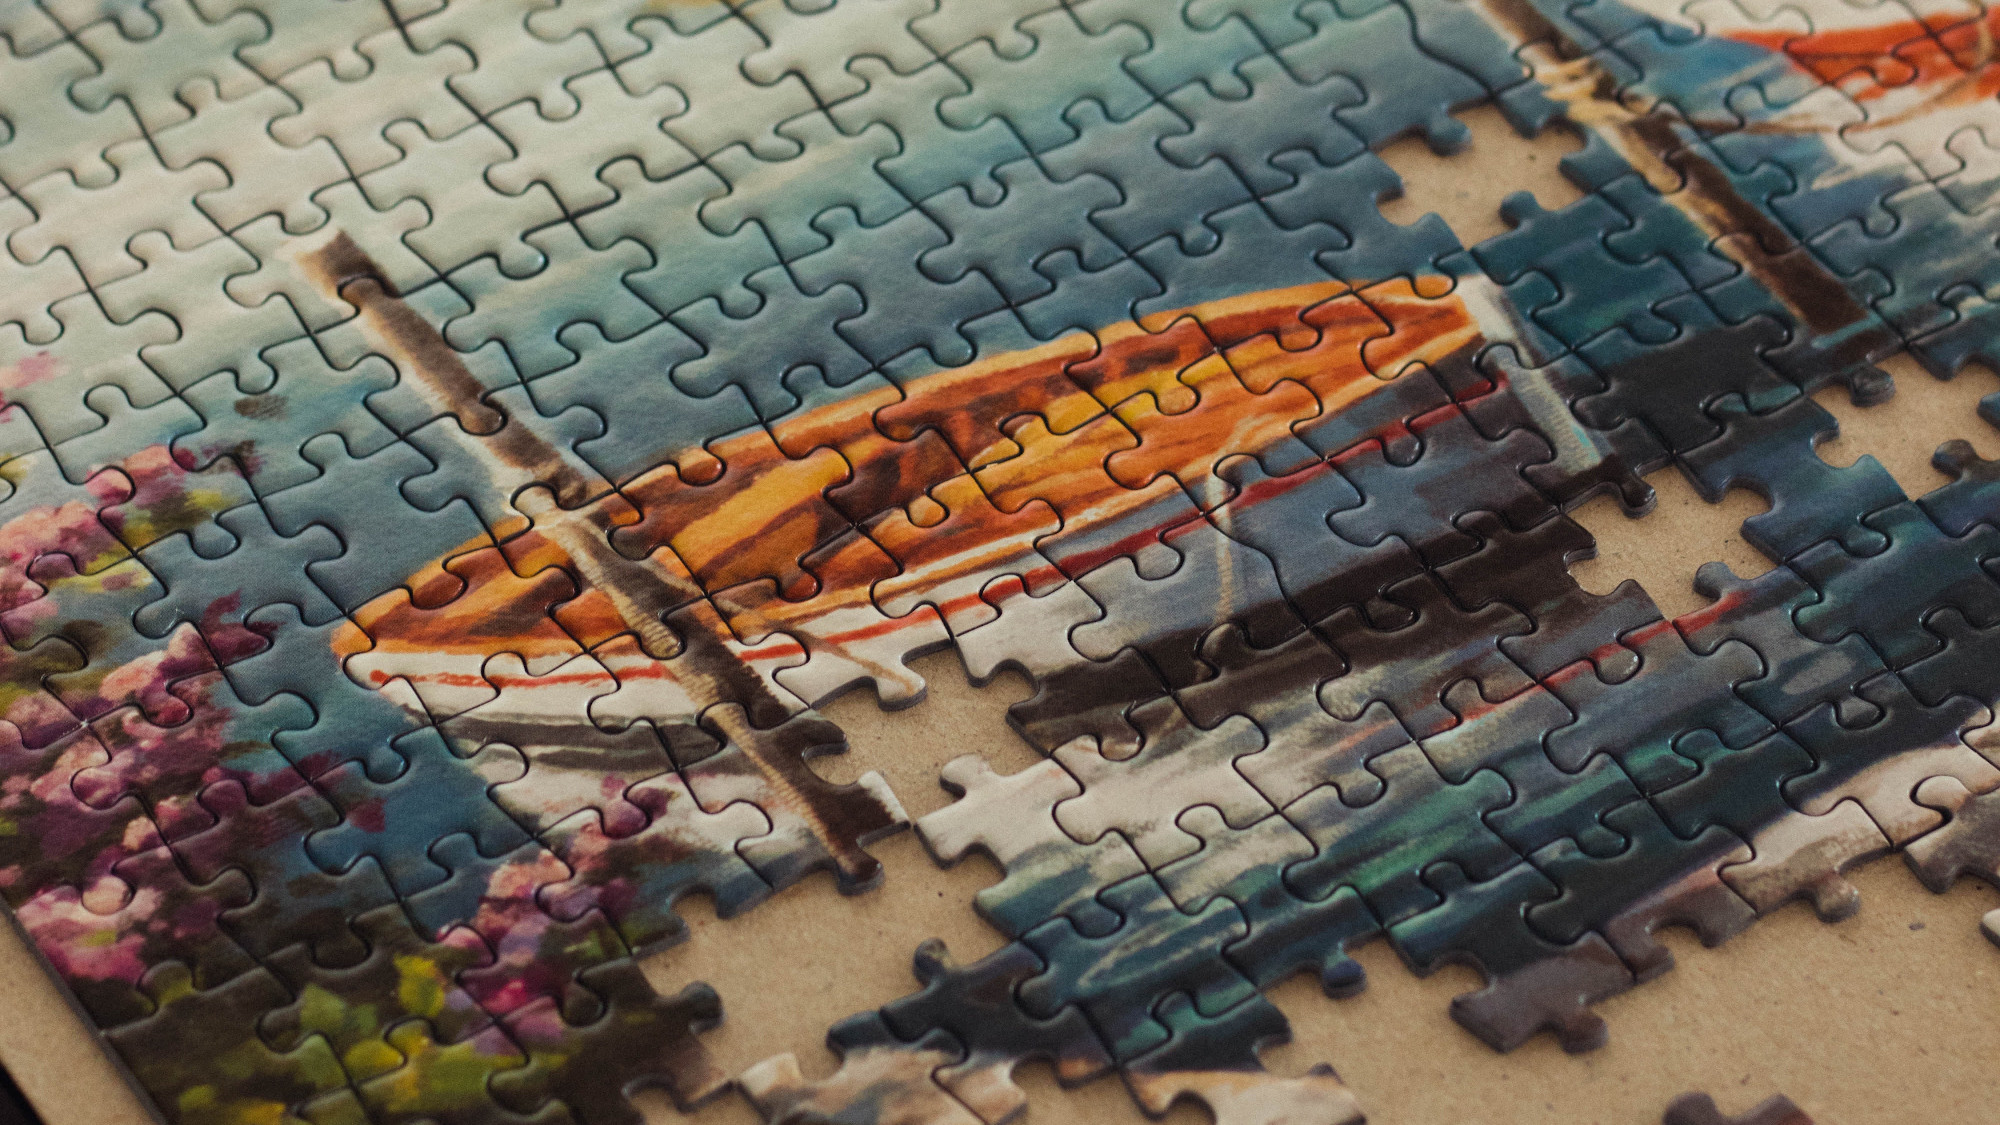 A jigsaw puzzle showing a rowboat, some pieces are still missing